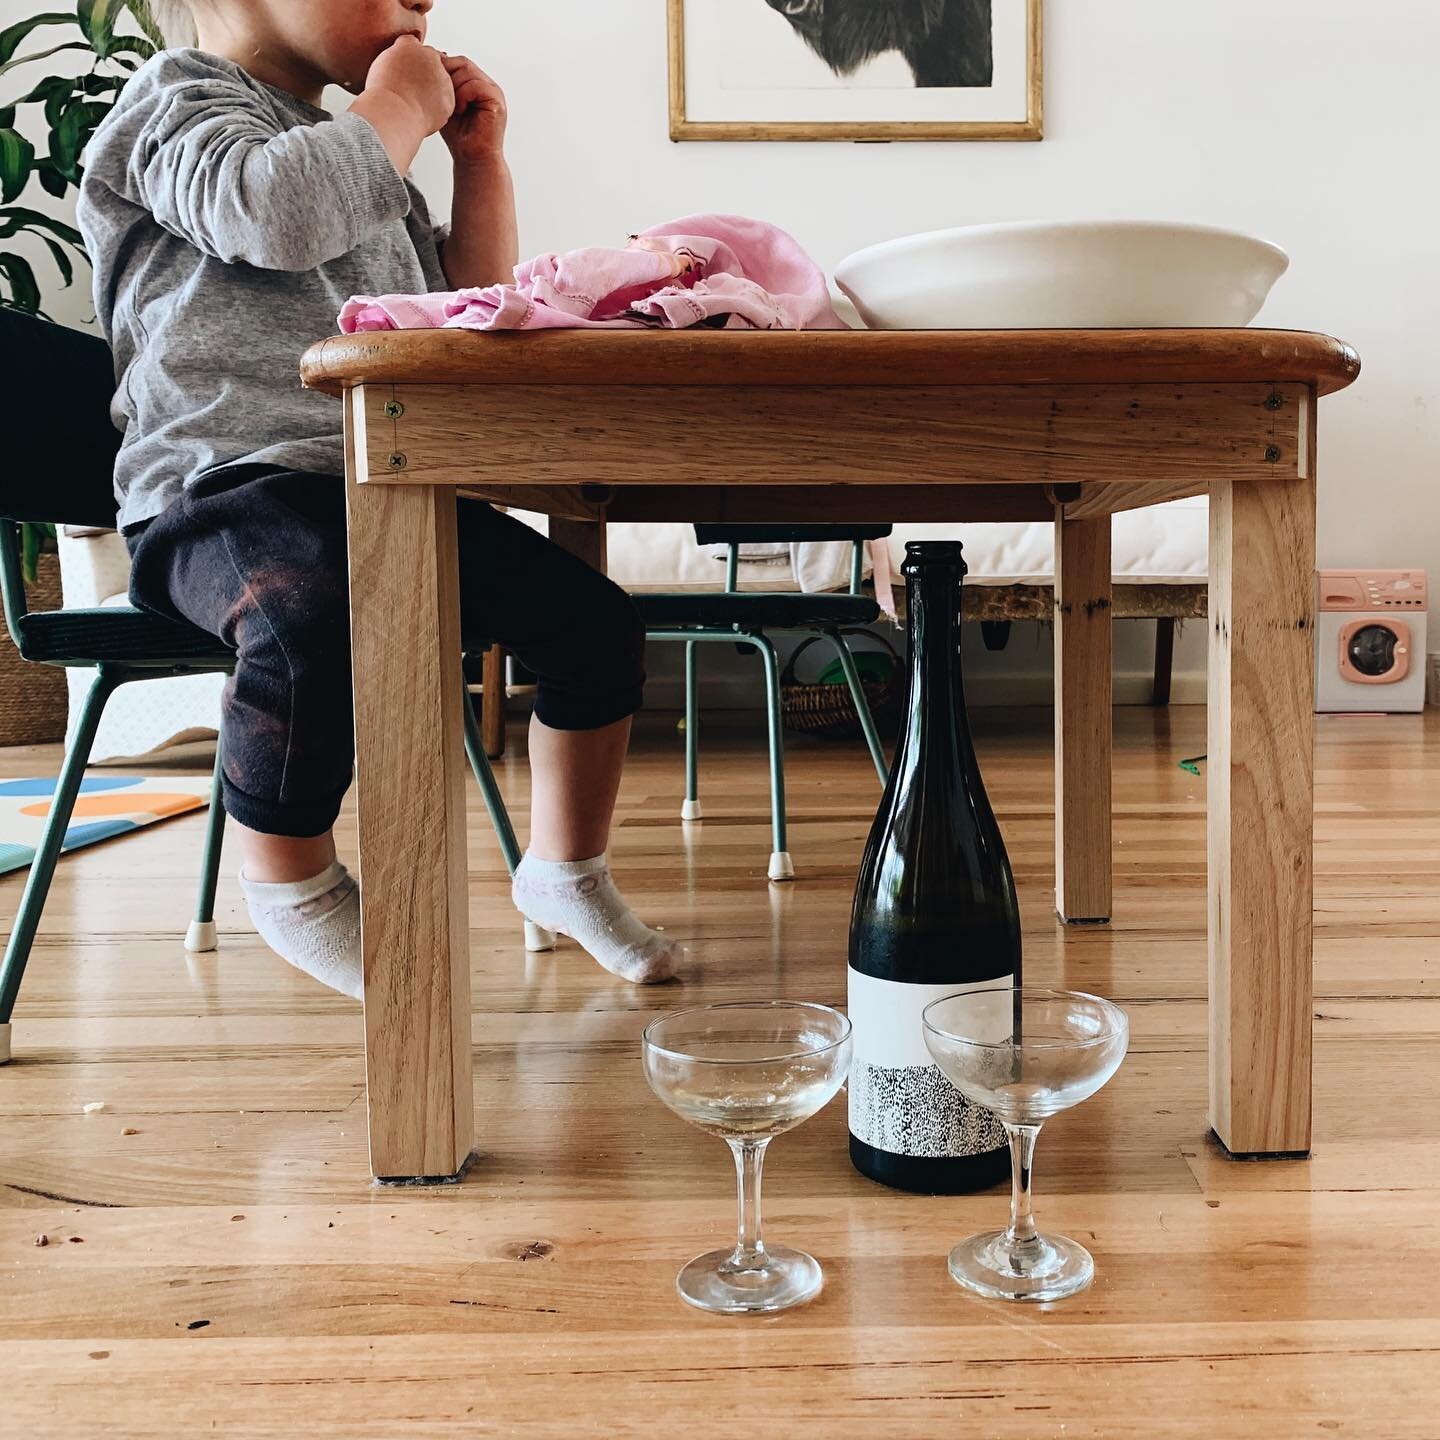 From Wednesday, when we got takeaway pasta from @shopatecafeandstore and ate at the kids&rsquo; play table while our oven was being installed in the next room. I&rsquo;d been saving this bottle of P&eacute;tillant naturel from @thewinefarm for a coup